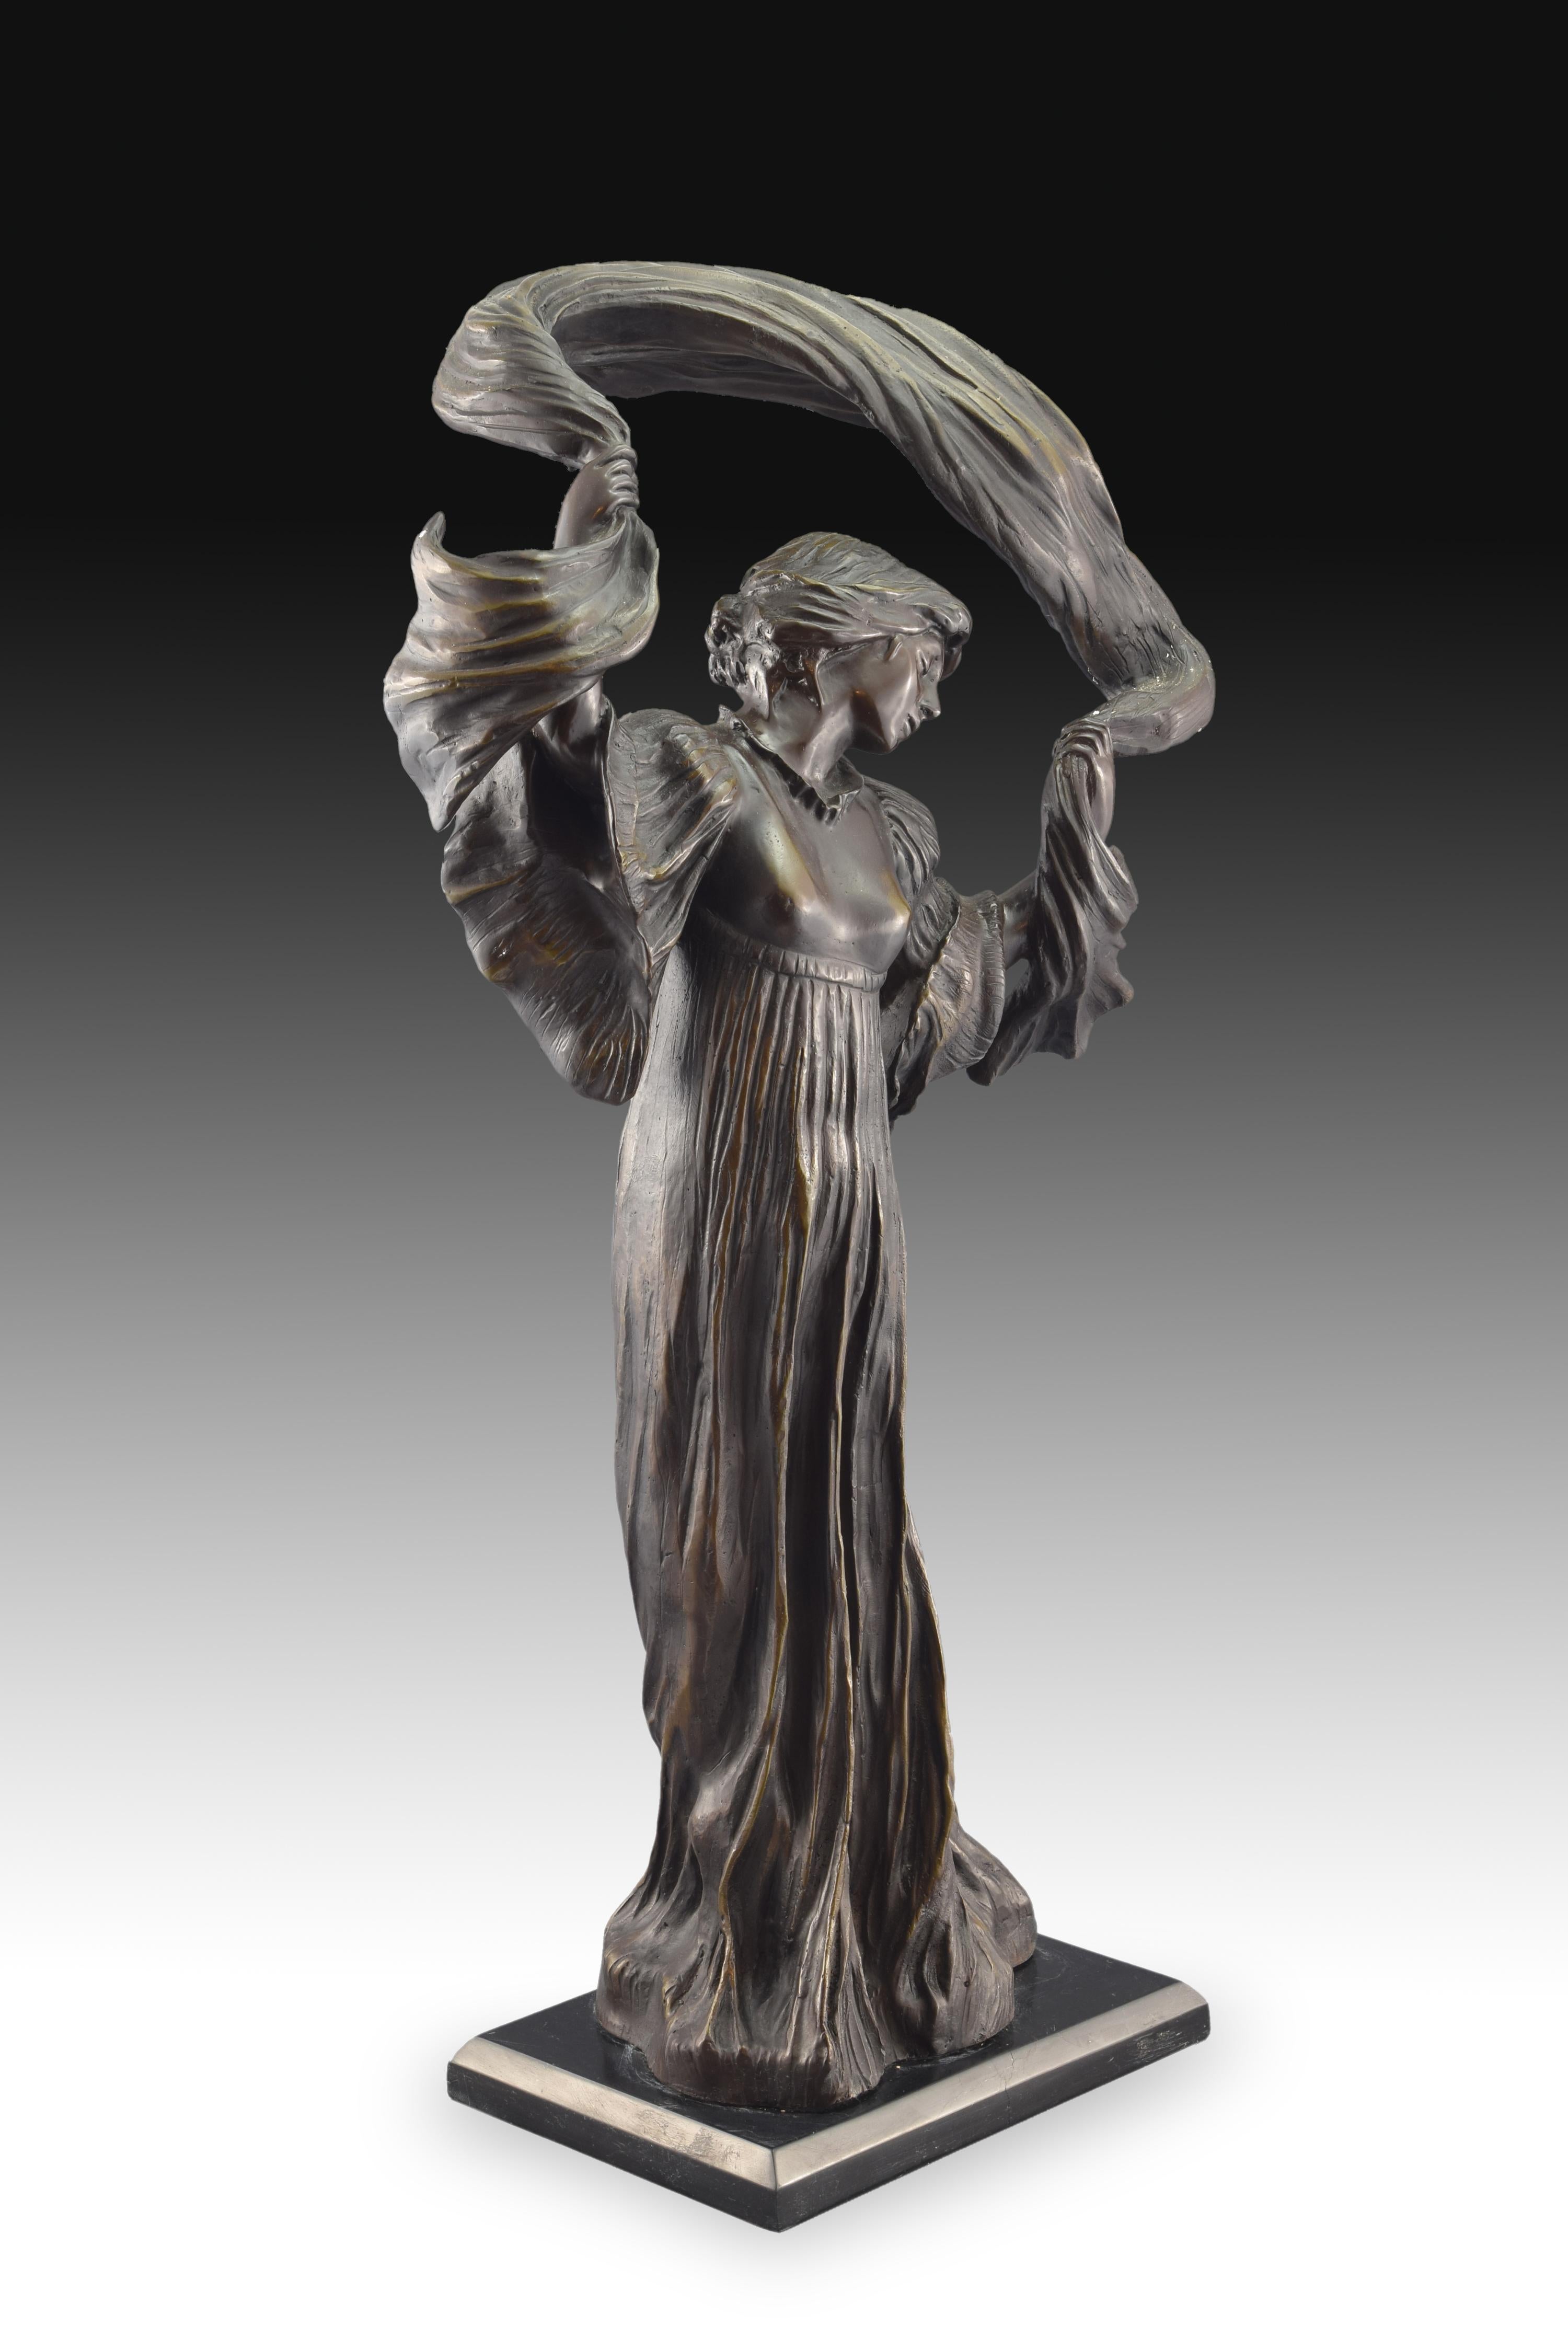 Other Lady with Shawl, Bronze, after Models from Agathon Léonard 'Dit', ‘1841-1923’